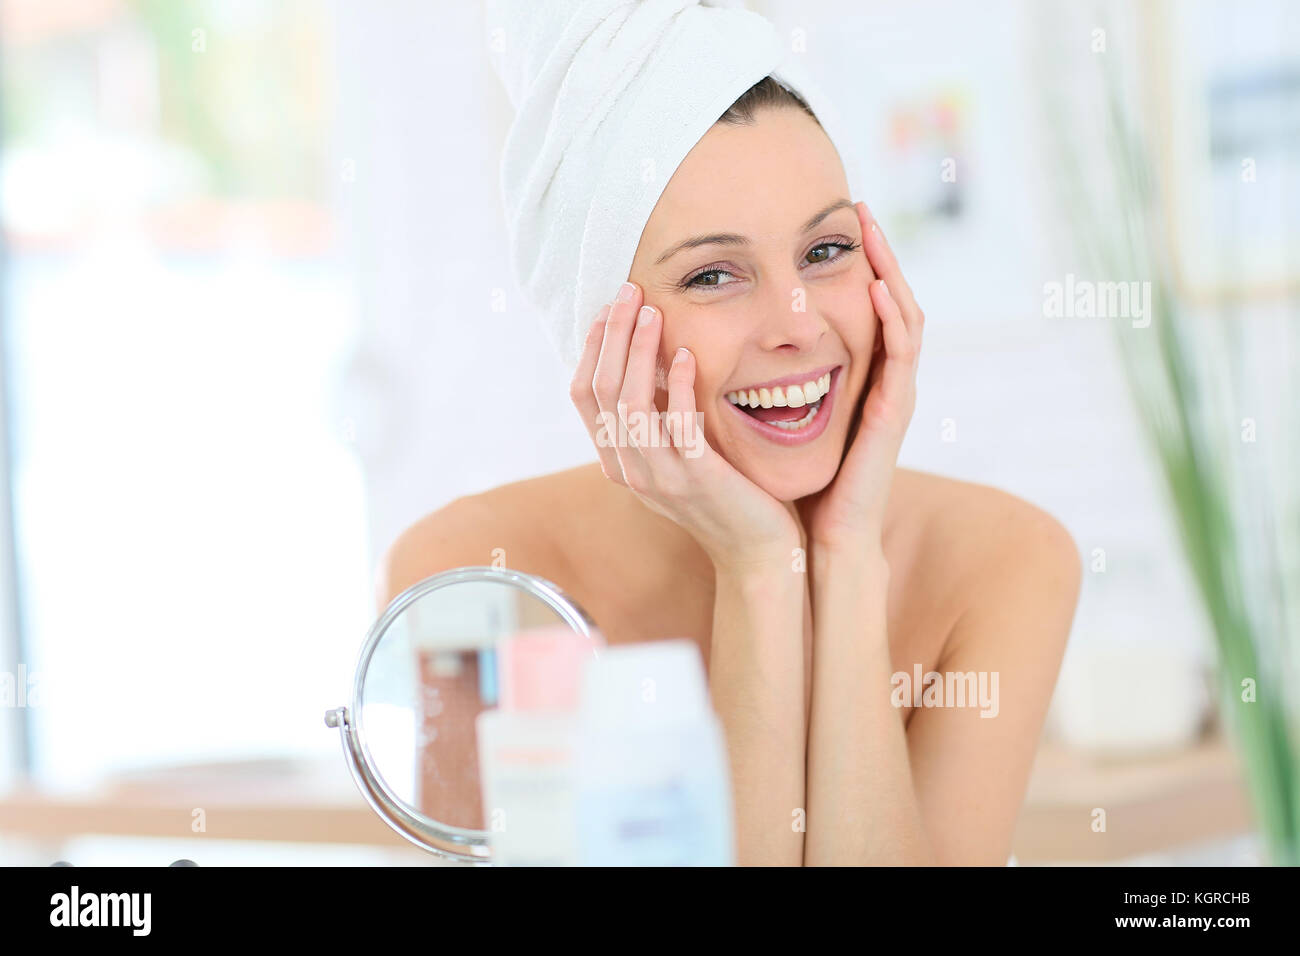 Cheerful woman in bathroom with towel over hair Stock Photo